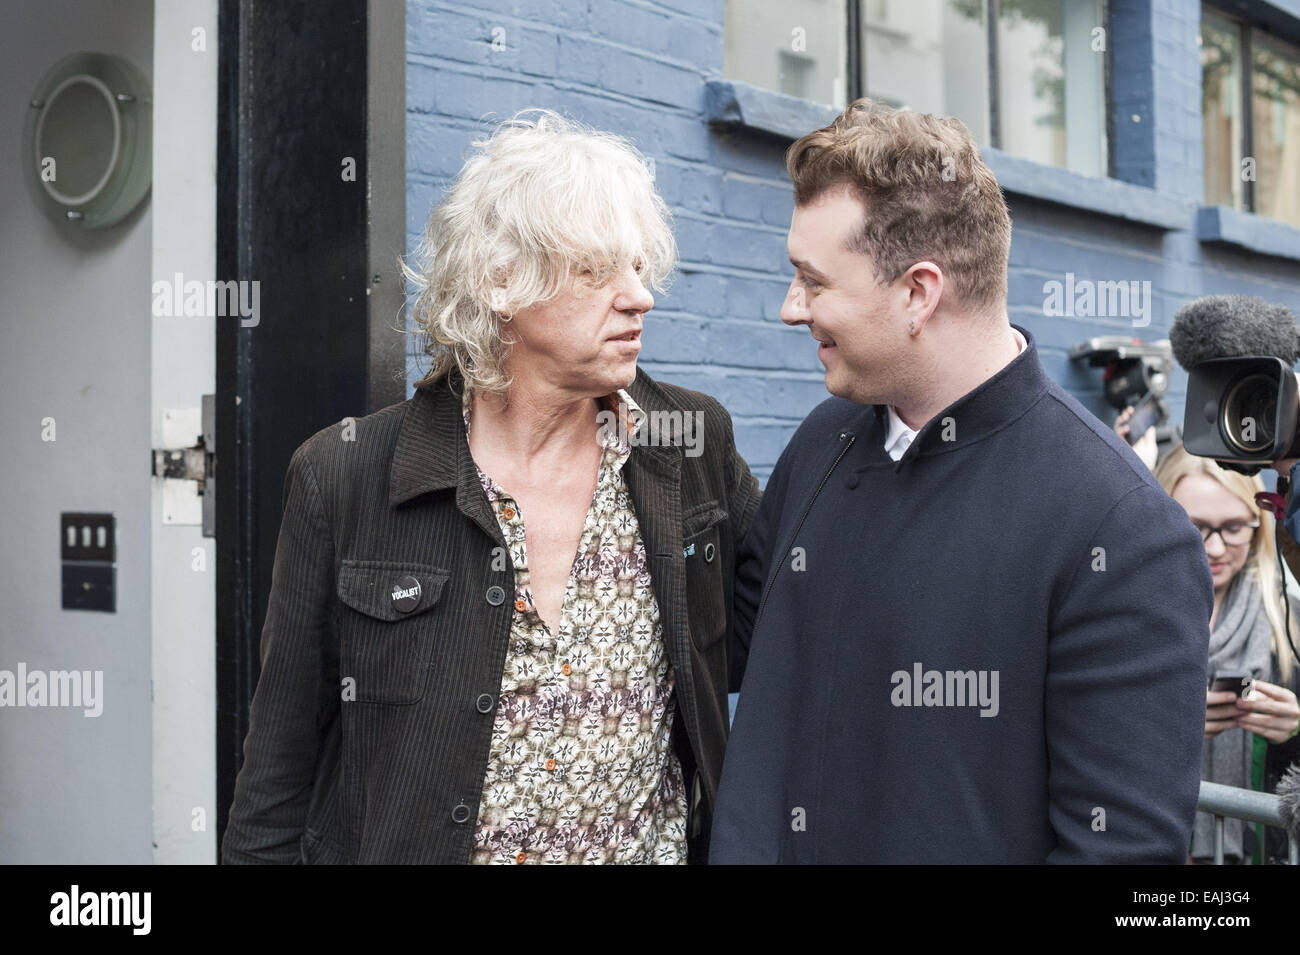 London, UK. 15th November, 2014. Artists arrive at Sarm Studios in Notting Hill, west London, to record Band Aid. Pictured: Bob Geldof and Sam Smith. © ZUMA Press, Inc./Alamy Live News Stock Photo